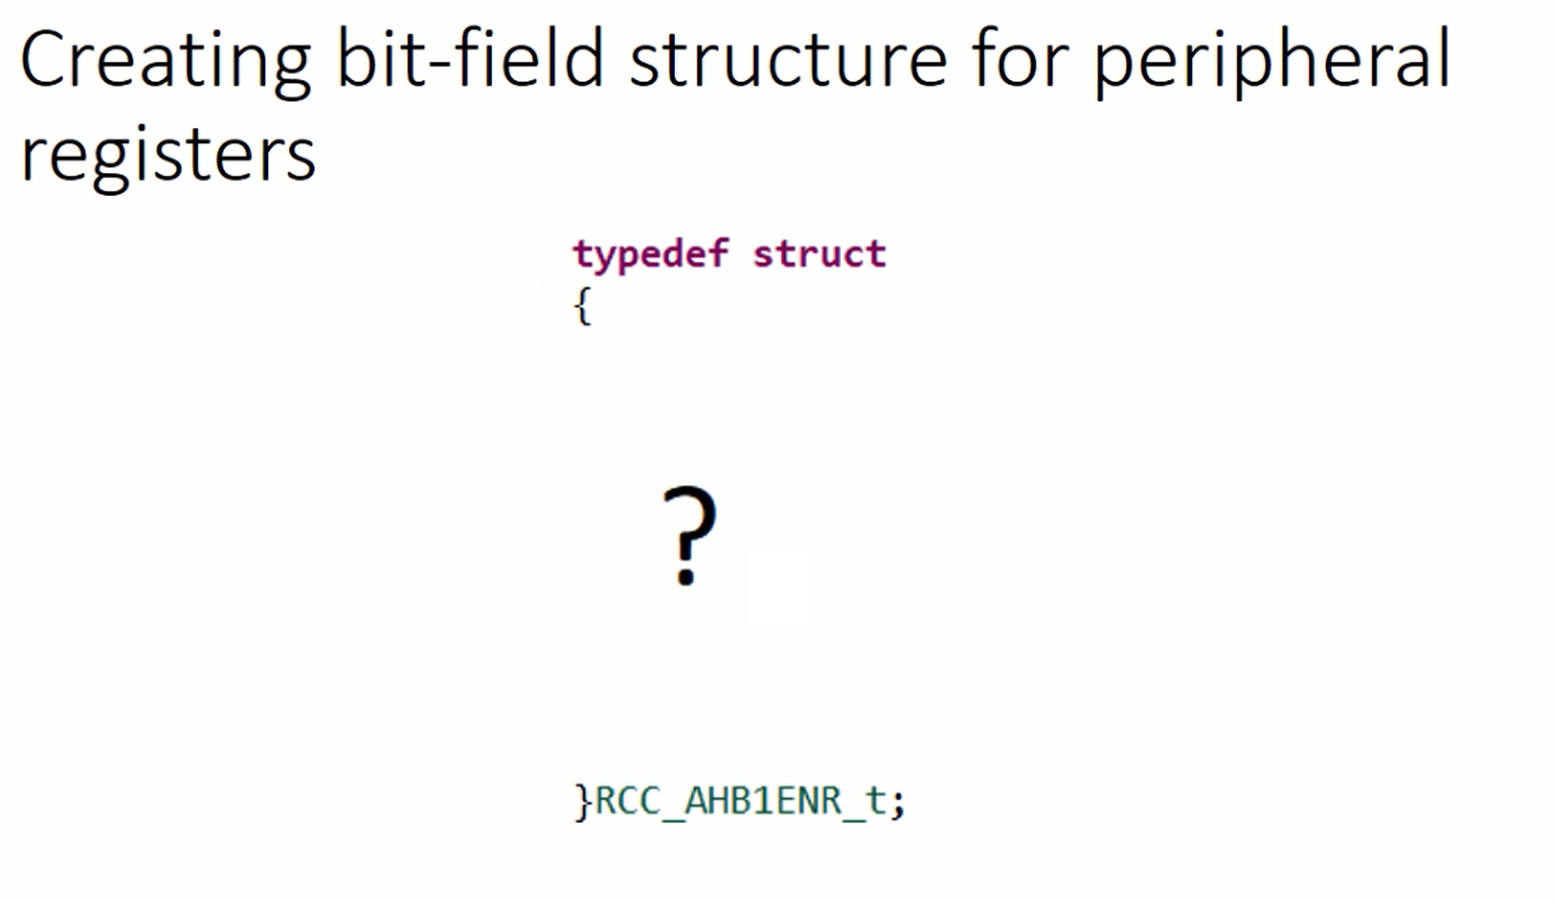 Bit-field exercise : Creating bit-field structure for peripheral registers